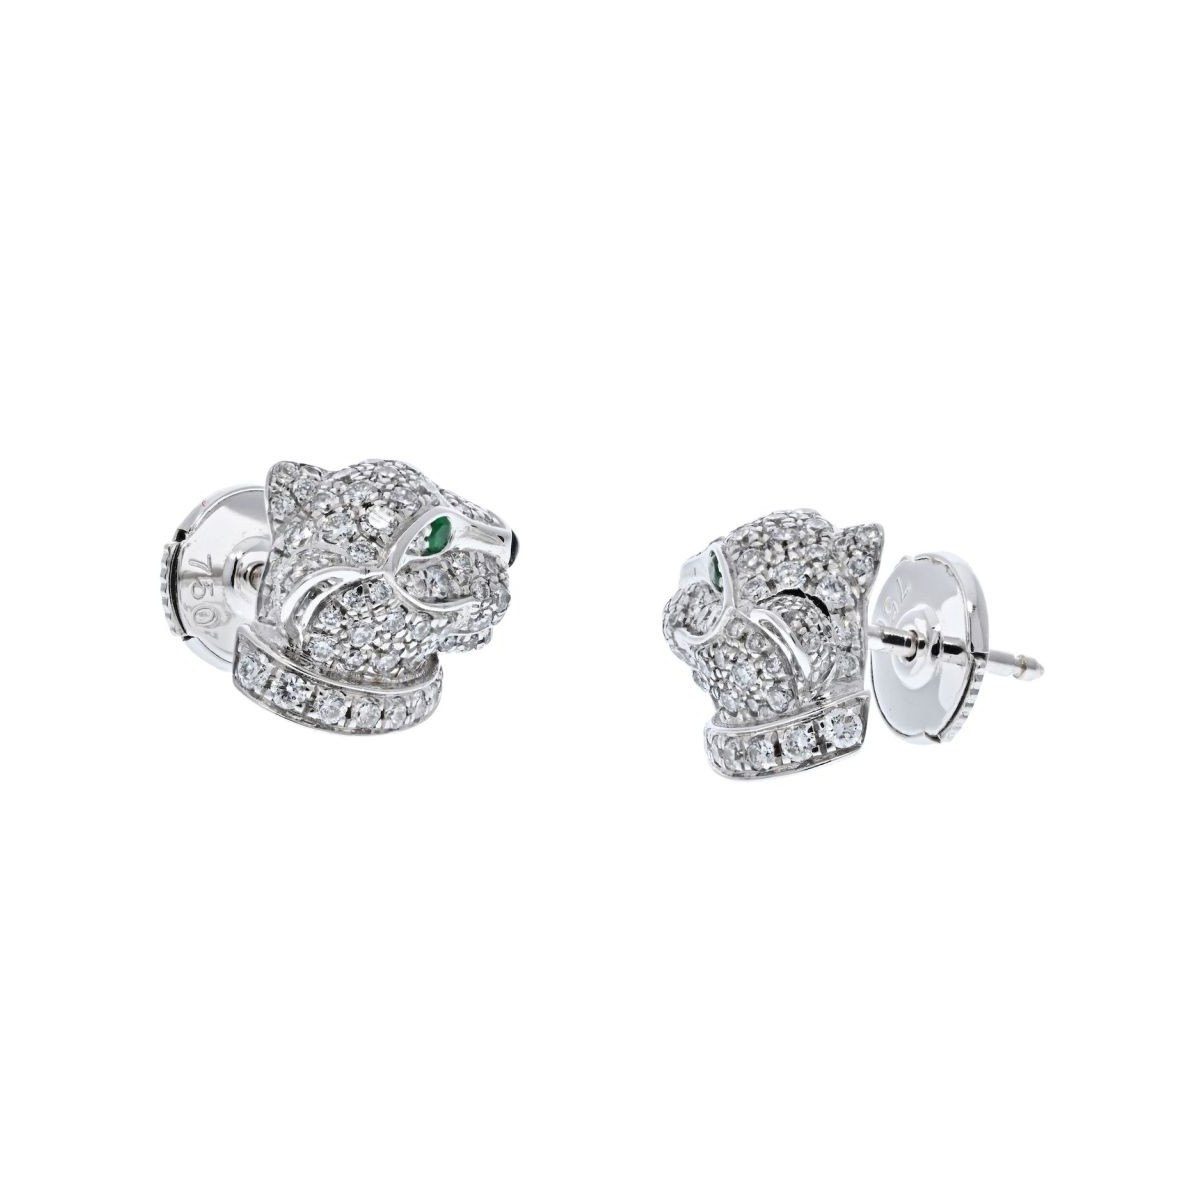 Cartier Panthere Earrings